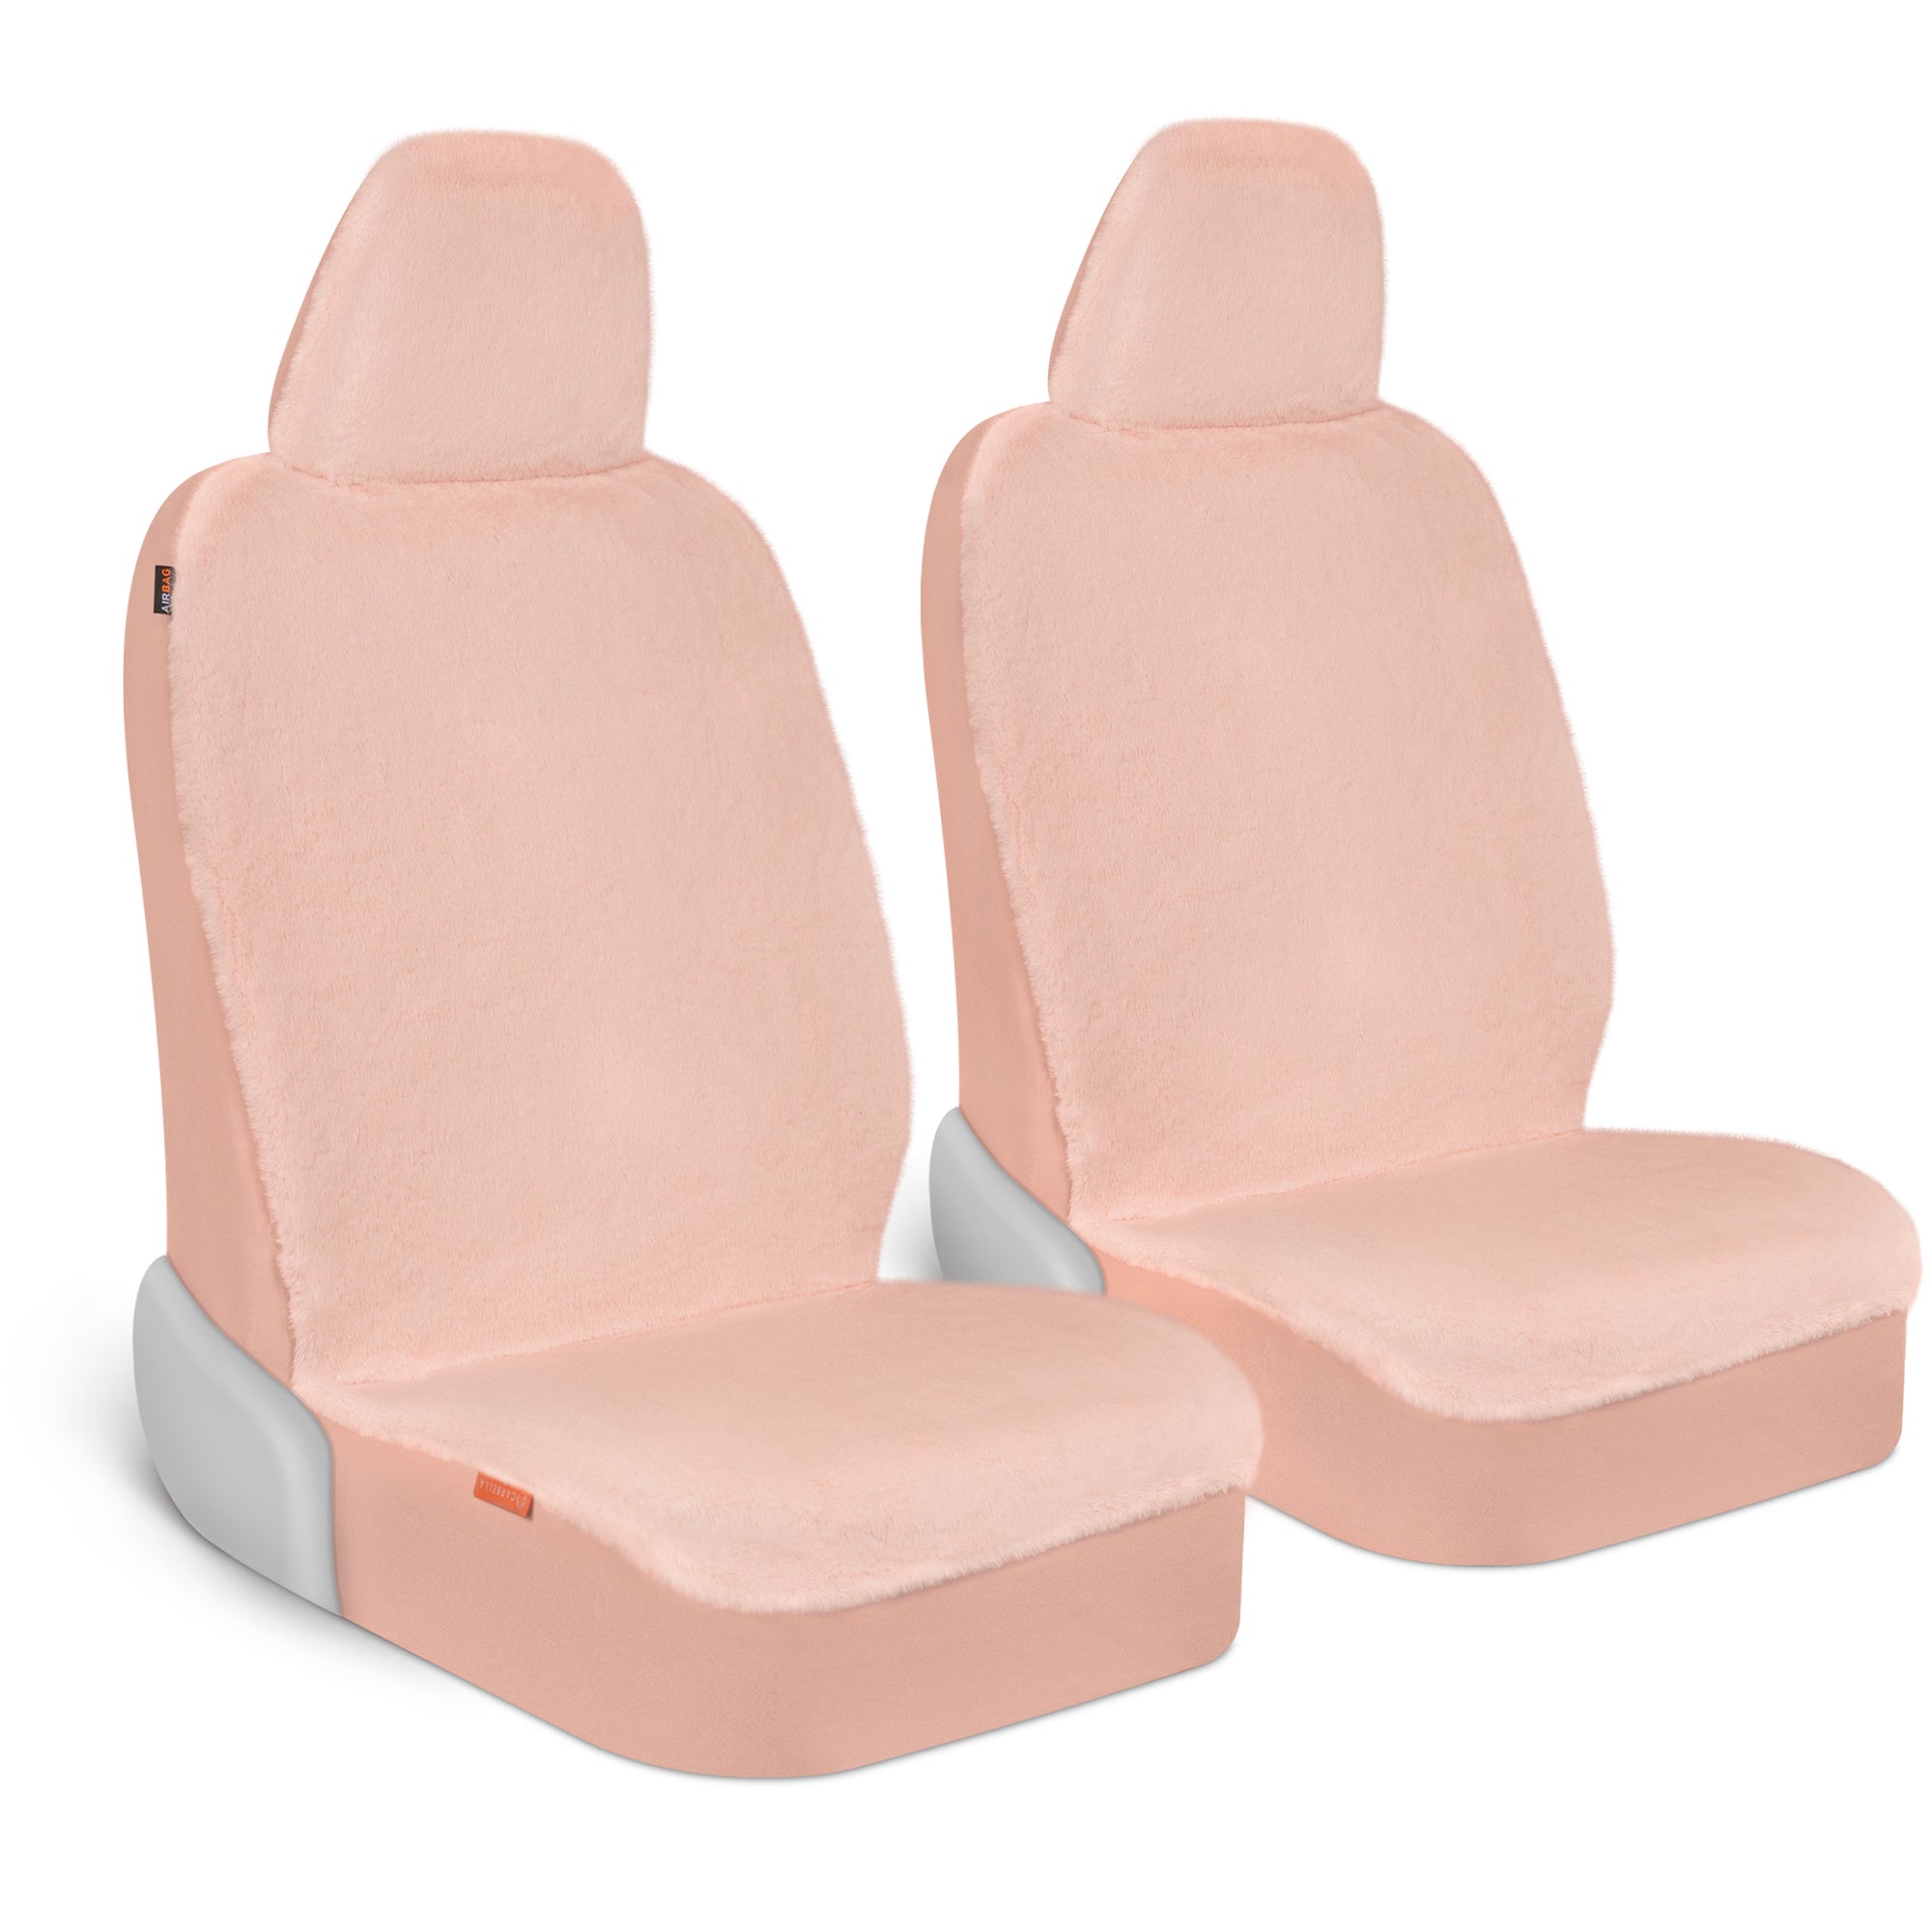 Carbella Sheepskin Car Seat Covers for Women, 2-Pack Faux Fur Car Seat Covers Front Seats Only, Cute Automotive Seat Covers For Cars for Women, Car Accessories for Women (Soft Pink)